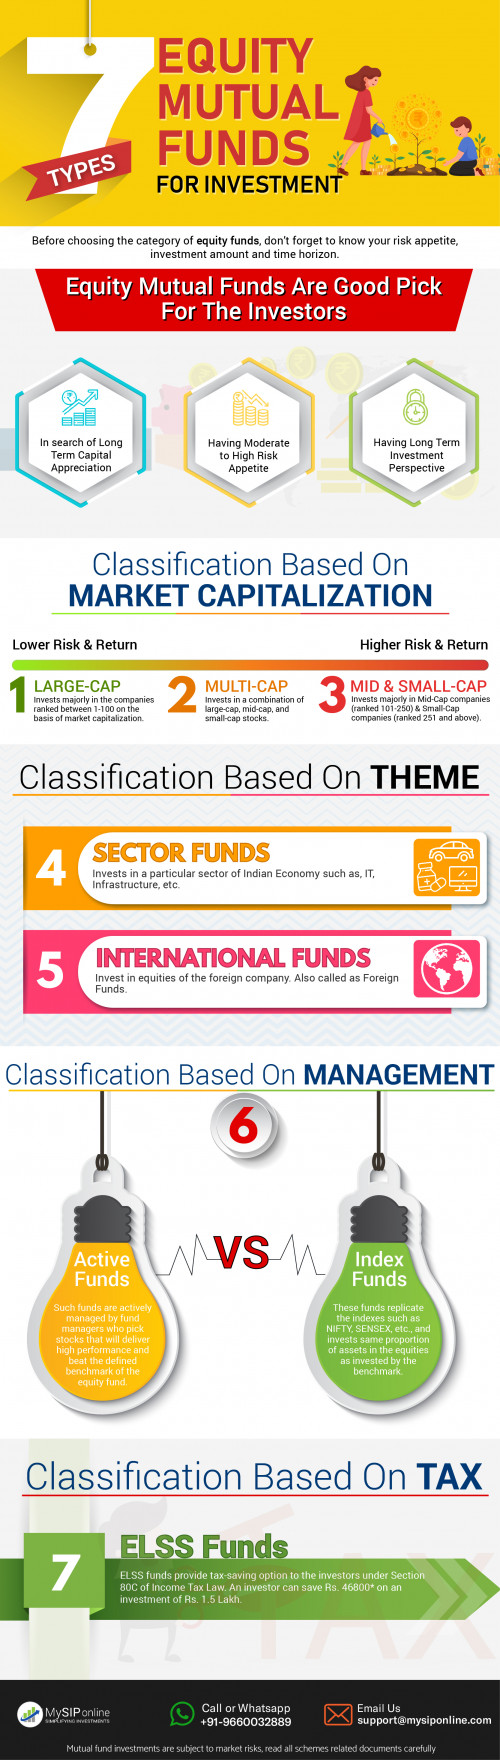 This image covers the most relevant topics on equity funds that investors need before investing in mutual funds. So start investing in equity funds at MySIPonline.